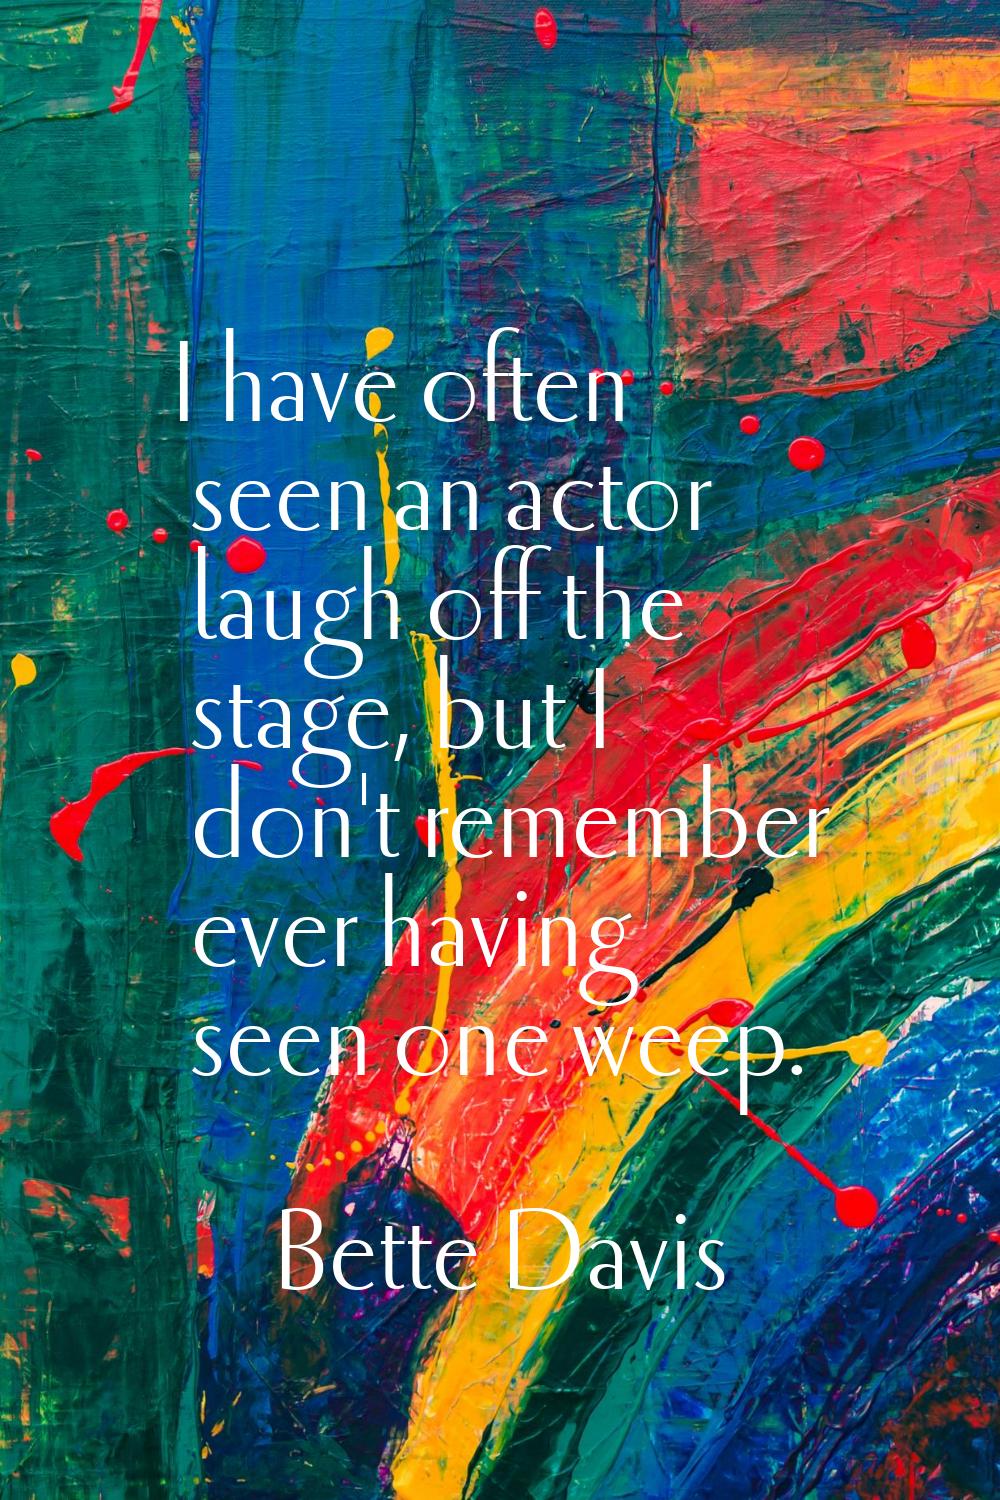 I have often seen an actor laugh off the stage, but I don't remember ever having seen one weep.